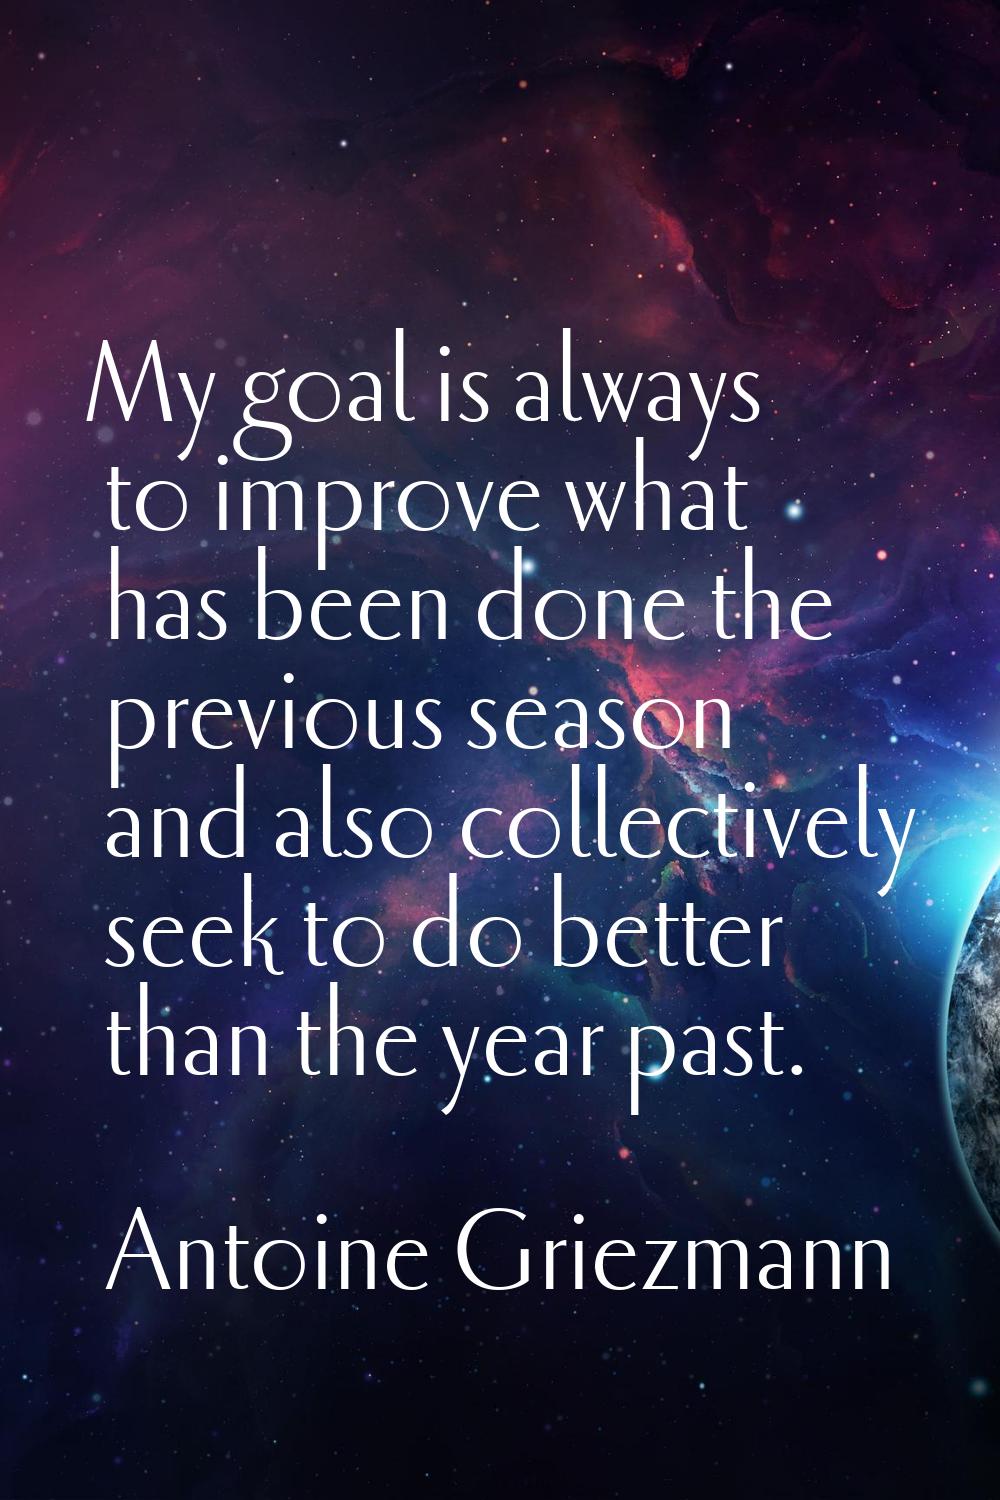 My goal is always to improve what has been done the previous season and also collectively seek to d